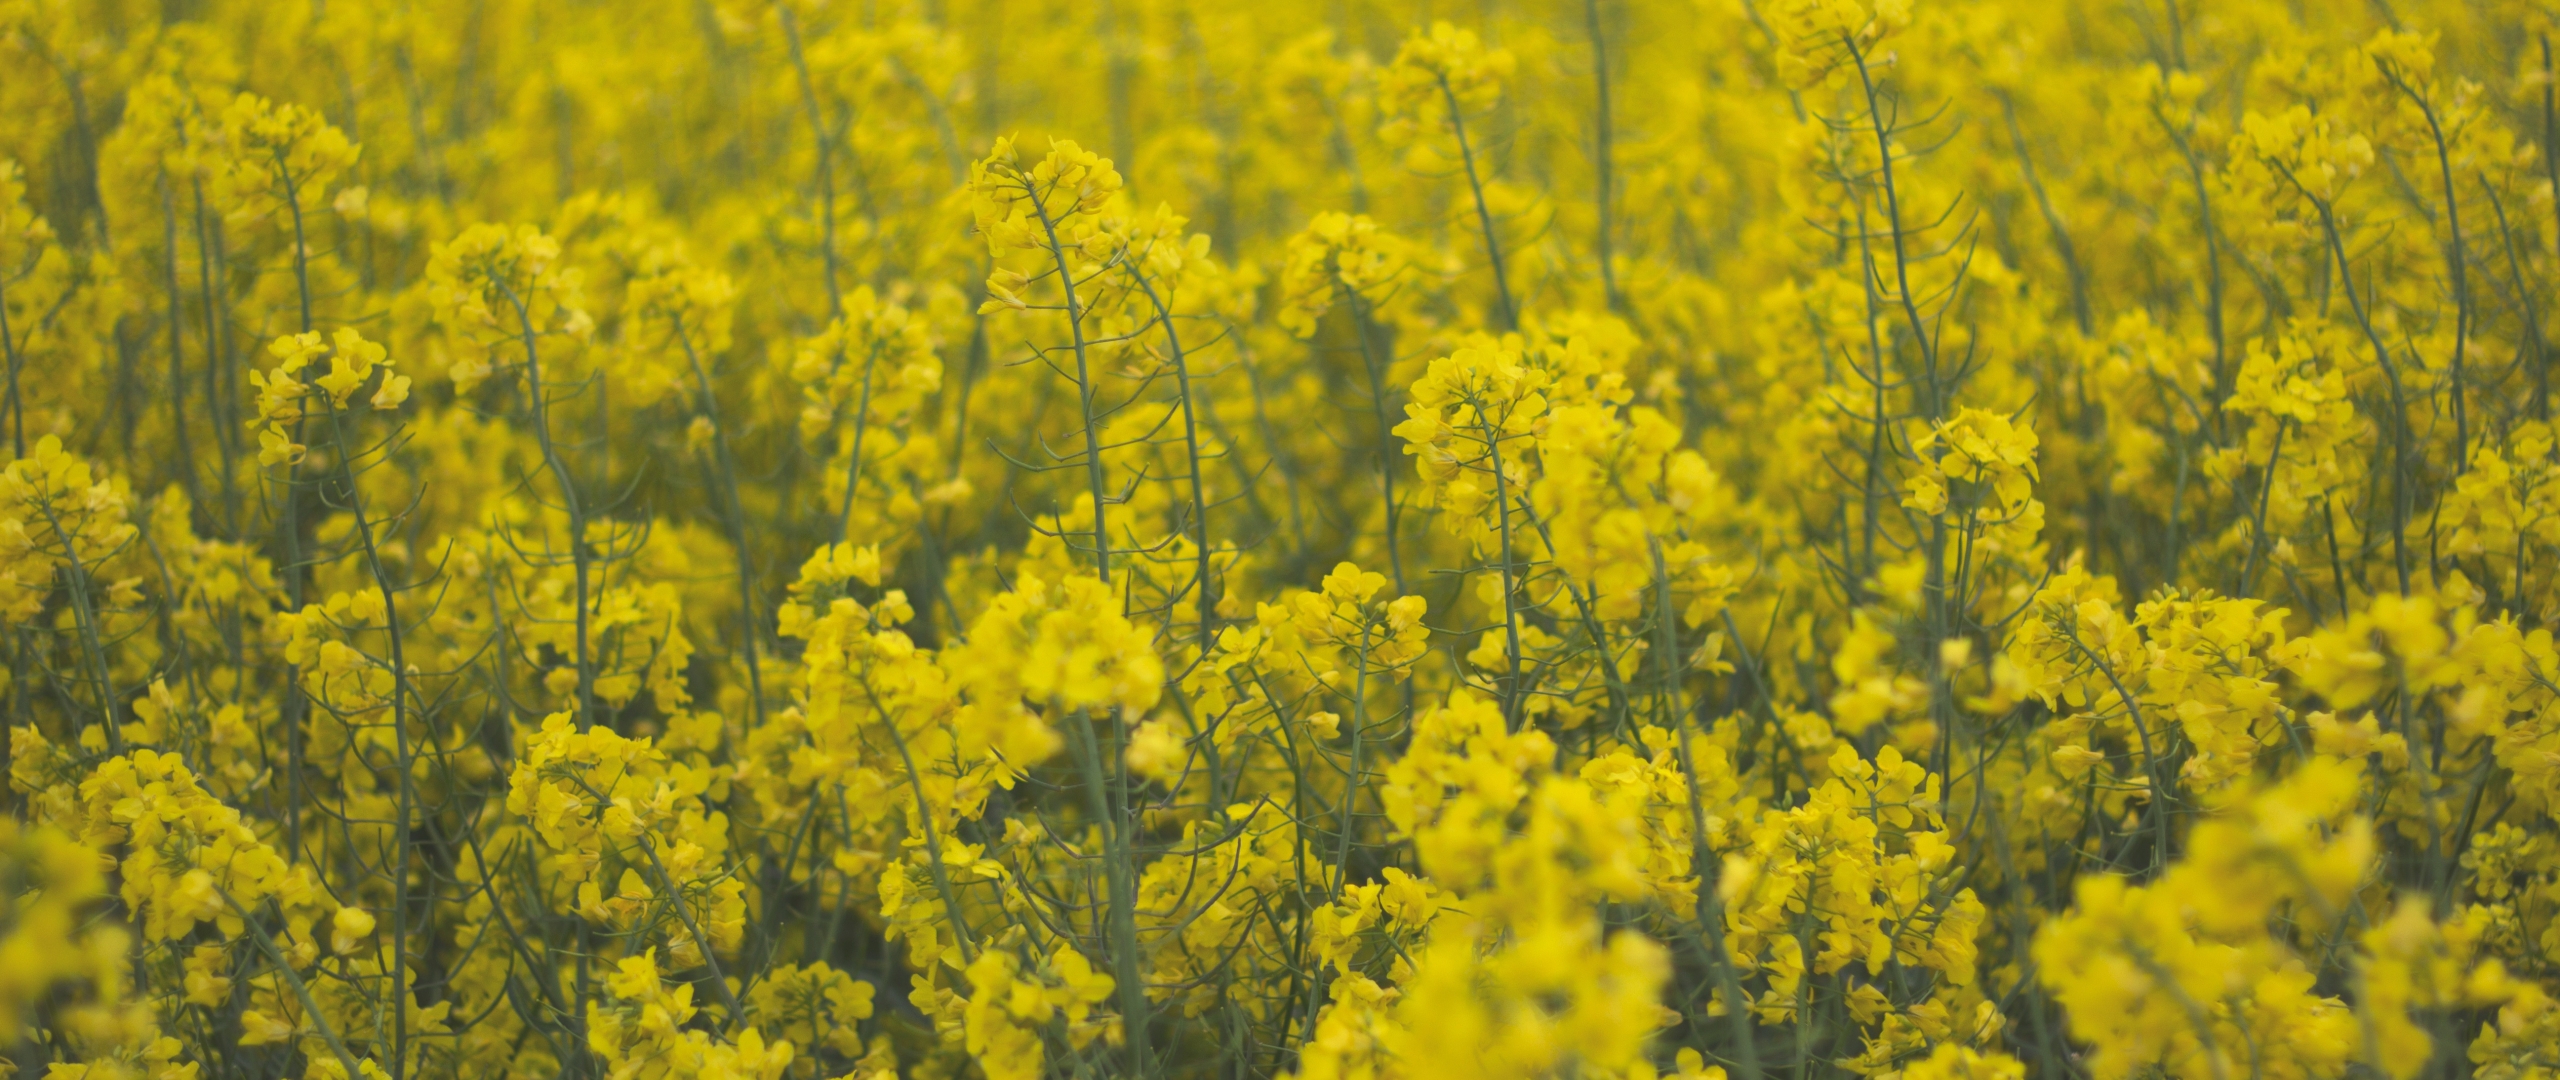 2560x1080 Flowers Field Yellow 2560x1080 Resolution Wallpaper Hd Nature 4k Wallpapers Images